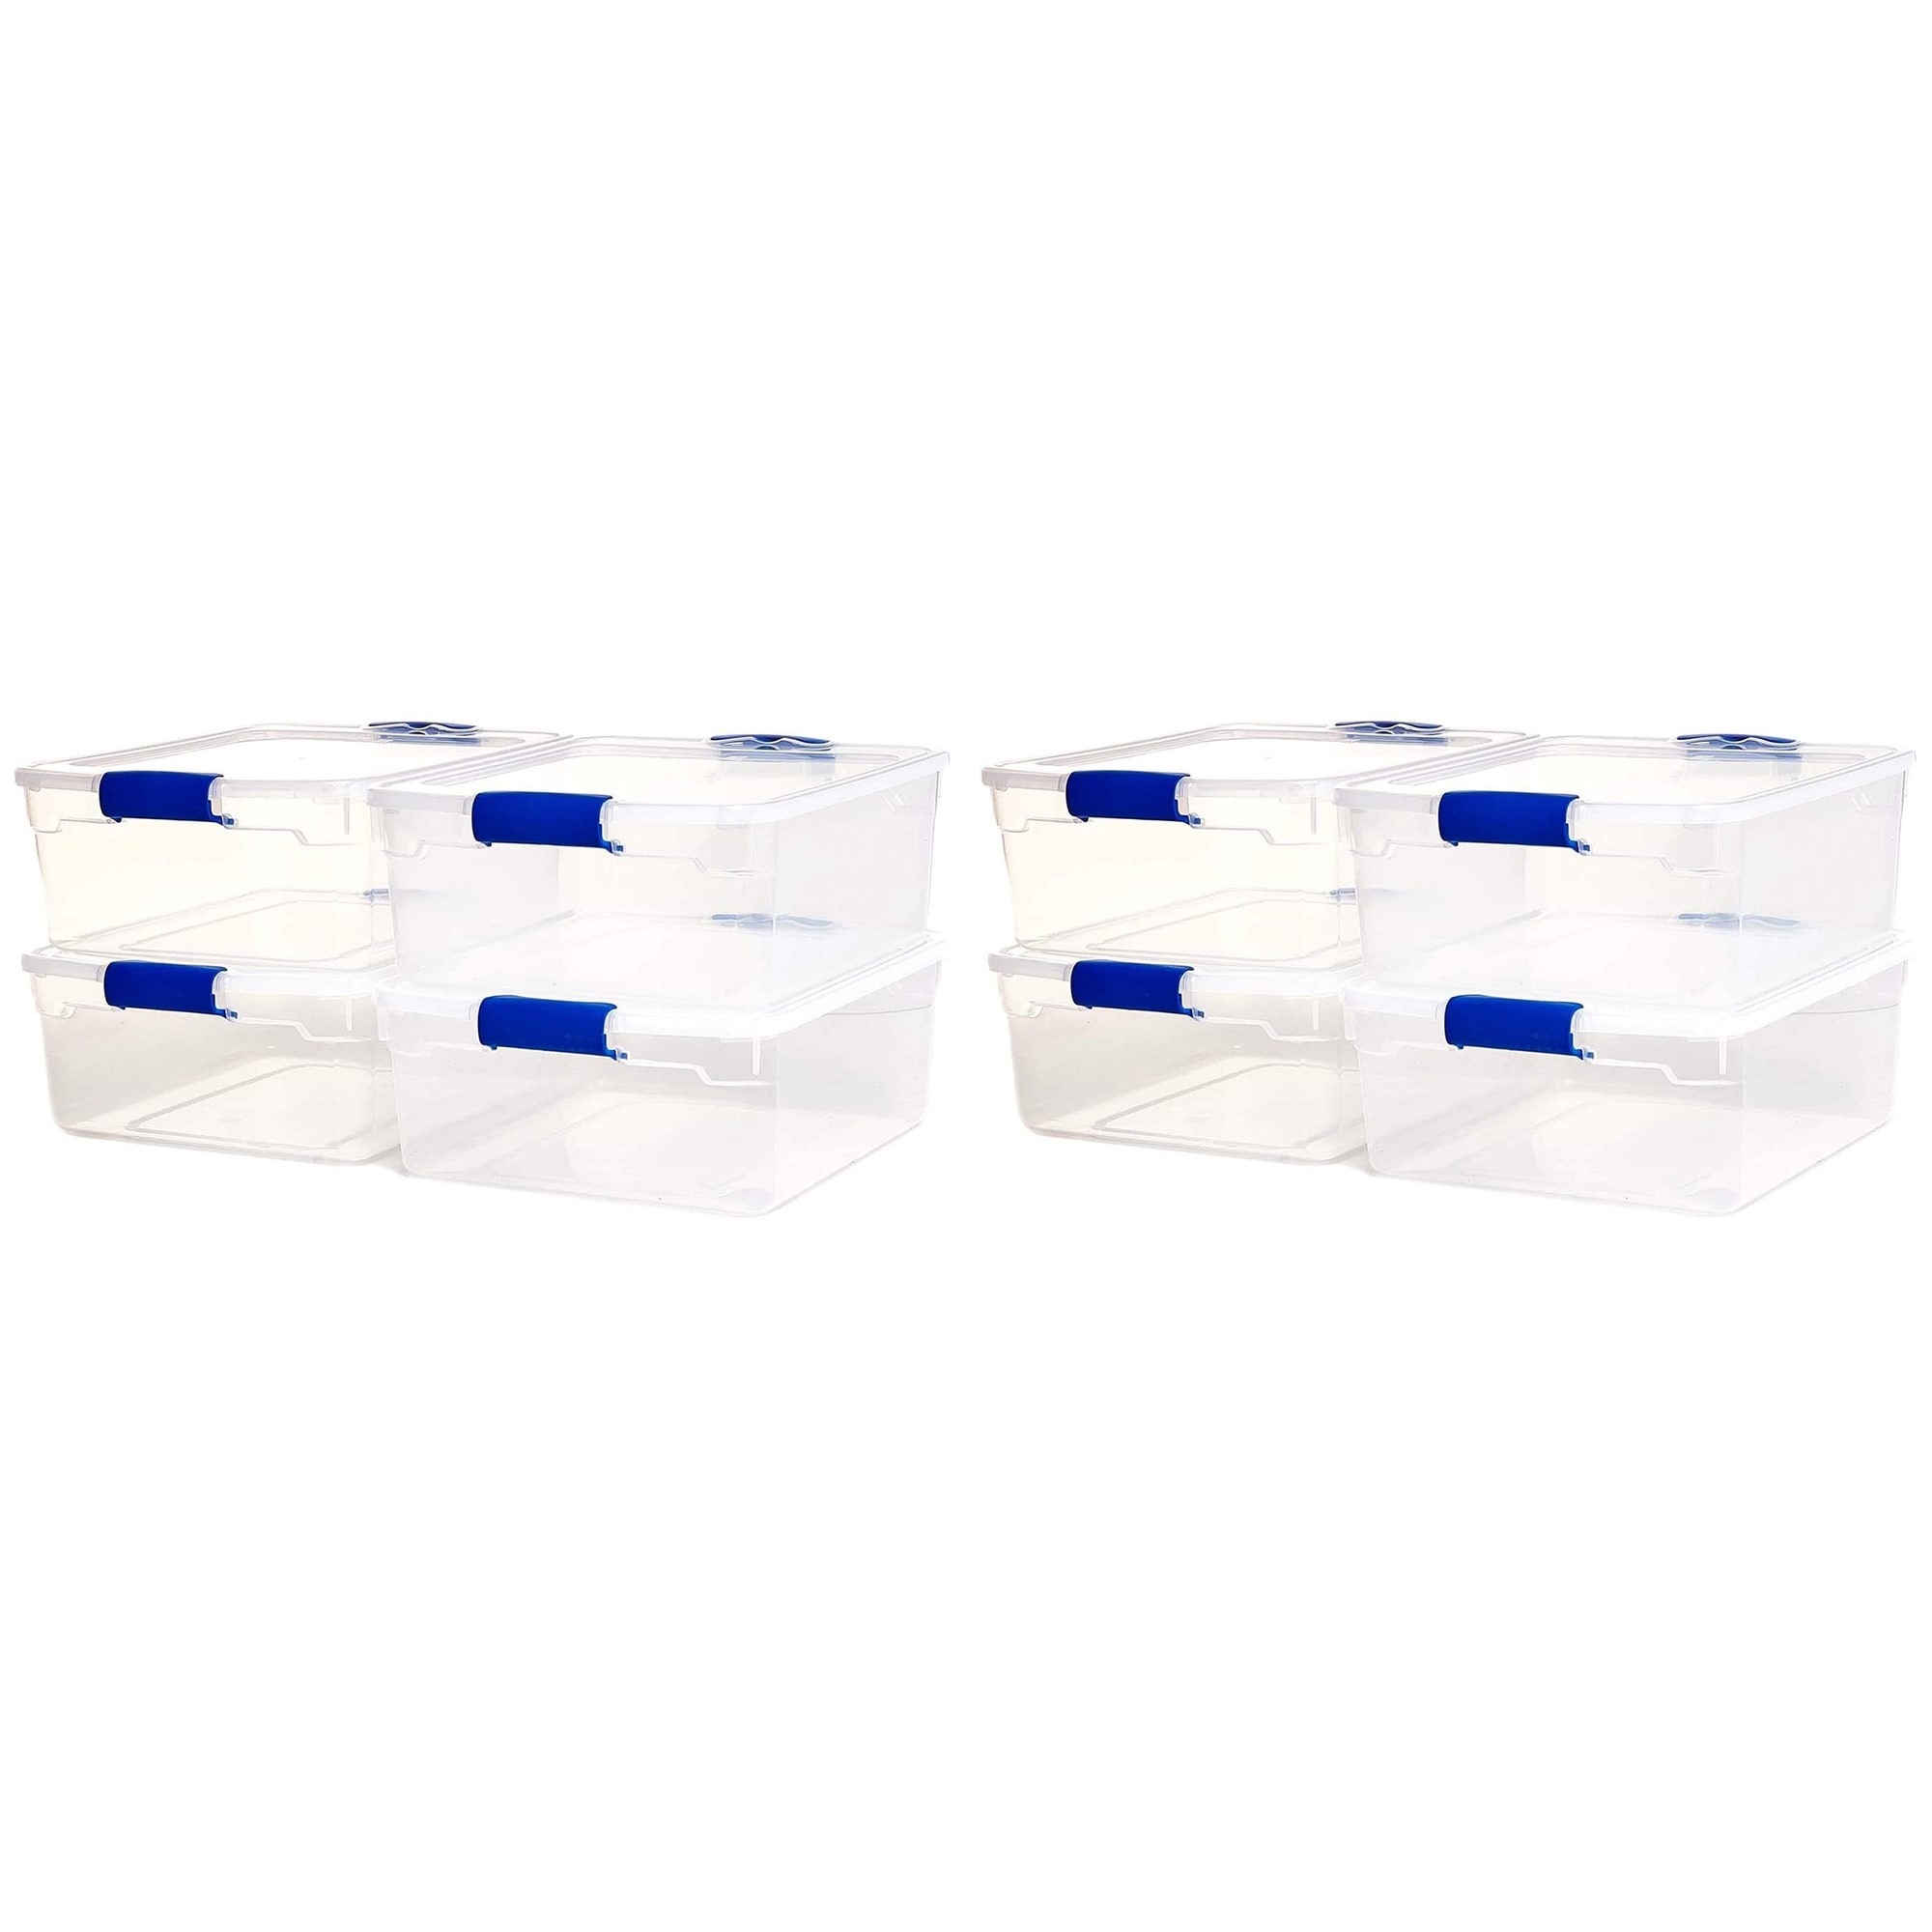 https://ak1.ostkcdn.com/images/products/is/images/direct/9ca1d29773daf1b4ab0b9536ed0cbf674b823627/Homz-15.5-Quart-Heavy-Duty-Modular-Stackable-Storage-Containers%2C-Clear%2C-8-Pack.jpg